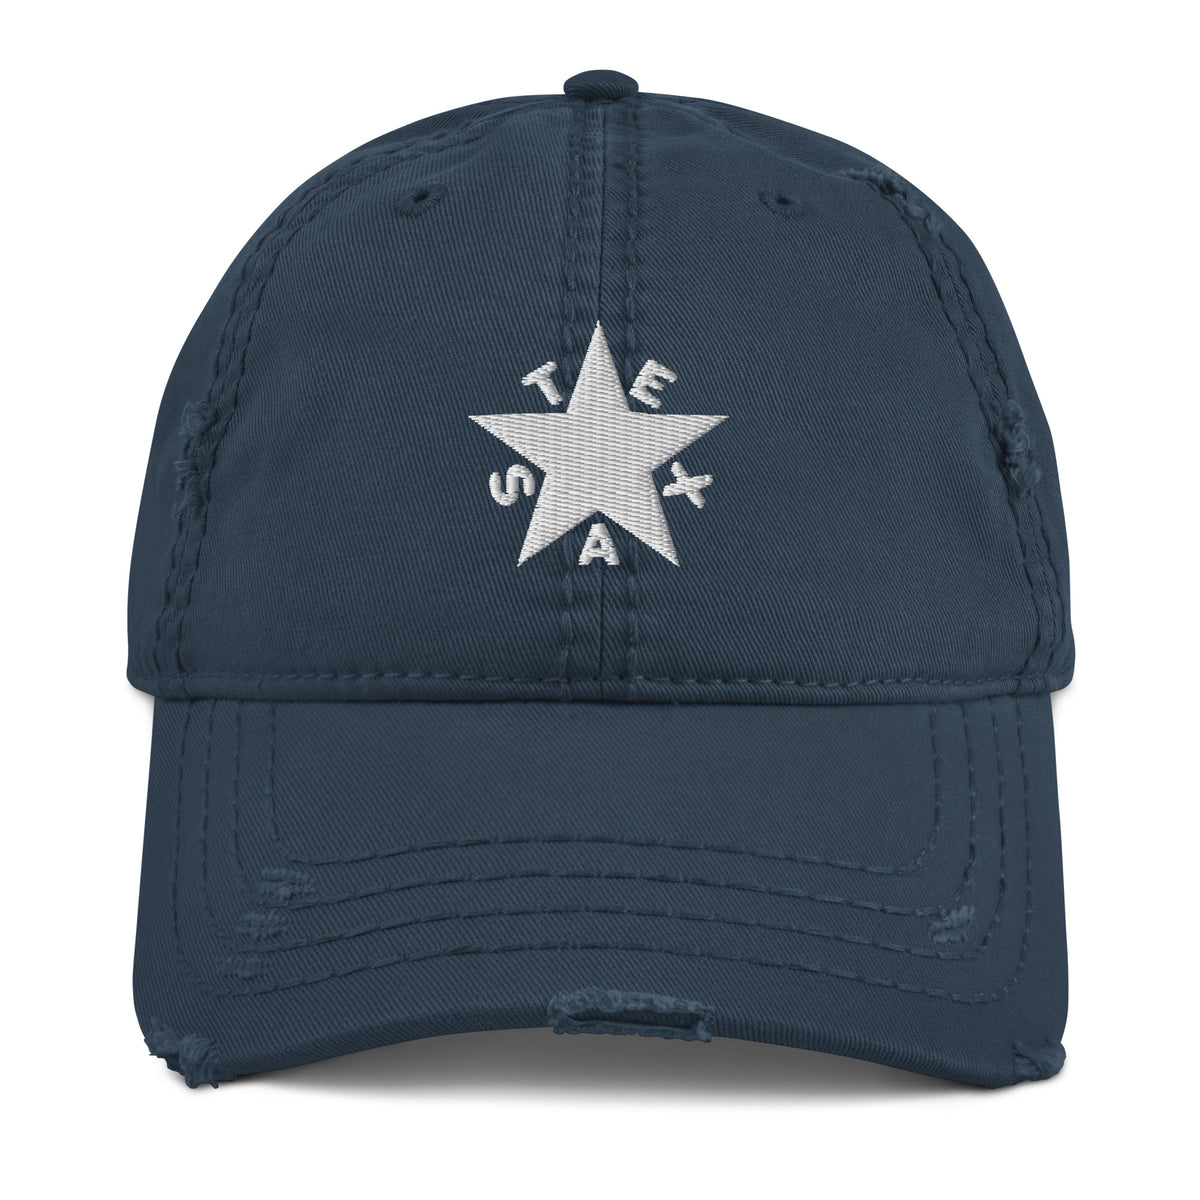 First Flag of the Texas Republic Distressed Hat